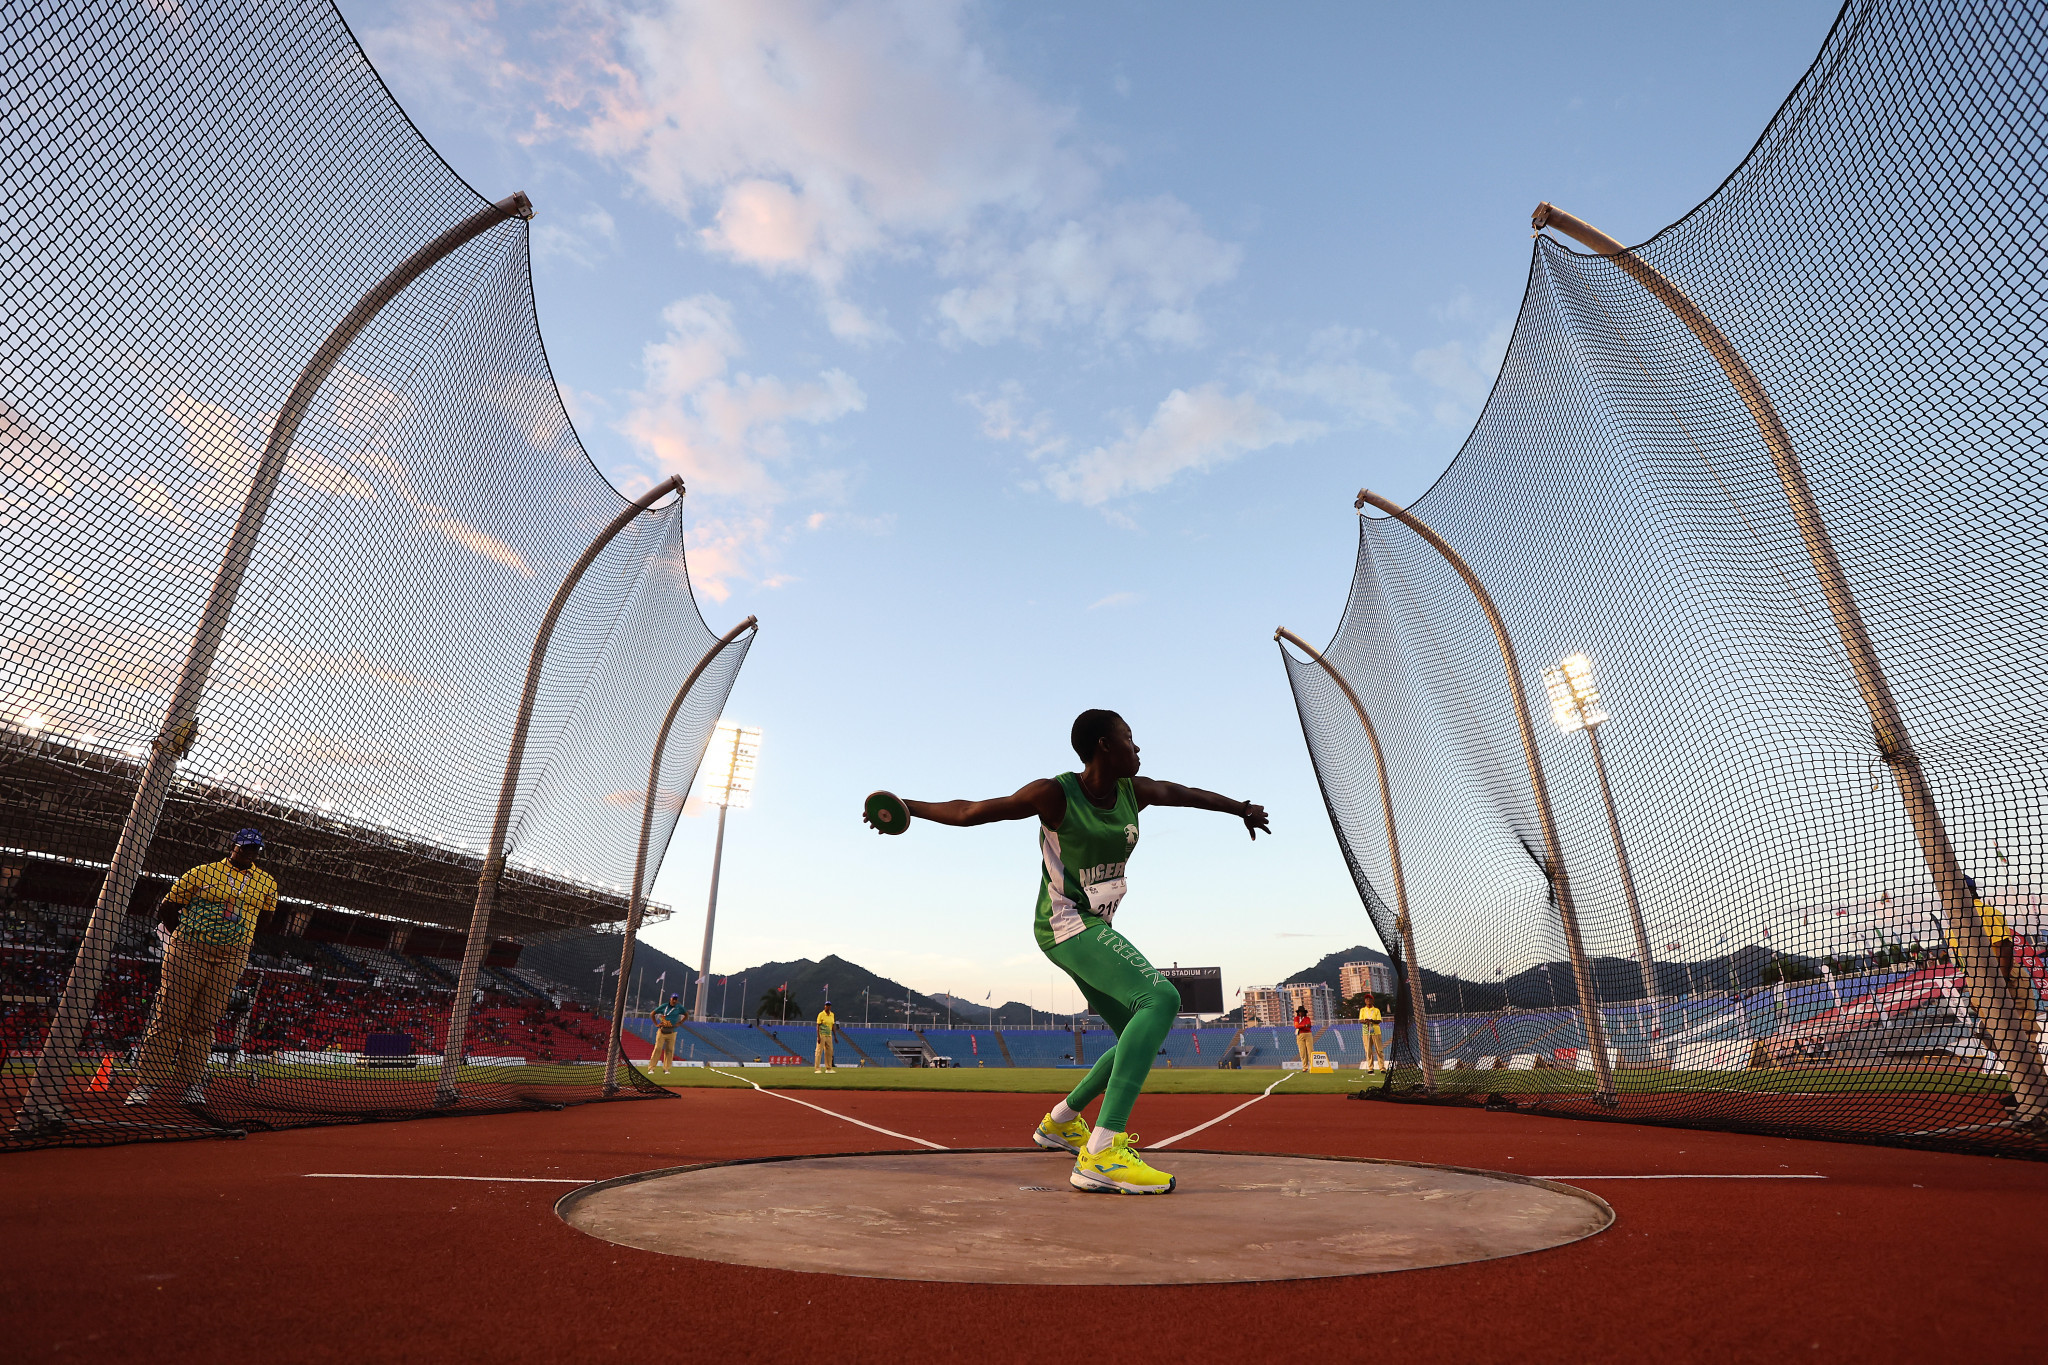 Destiny Nkemakonam Agbo of Nigeria triumphed in the women's F42-44 and F61-64 discus throw at the Commonwealth Youth Games ©Getty Images